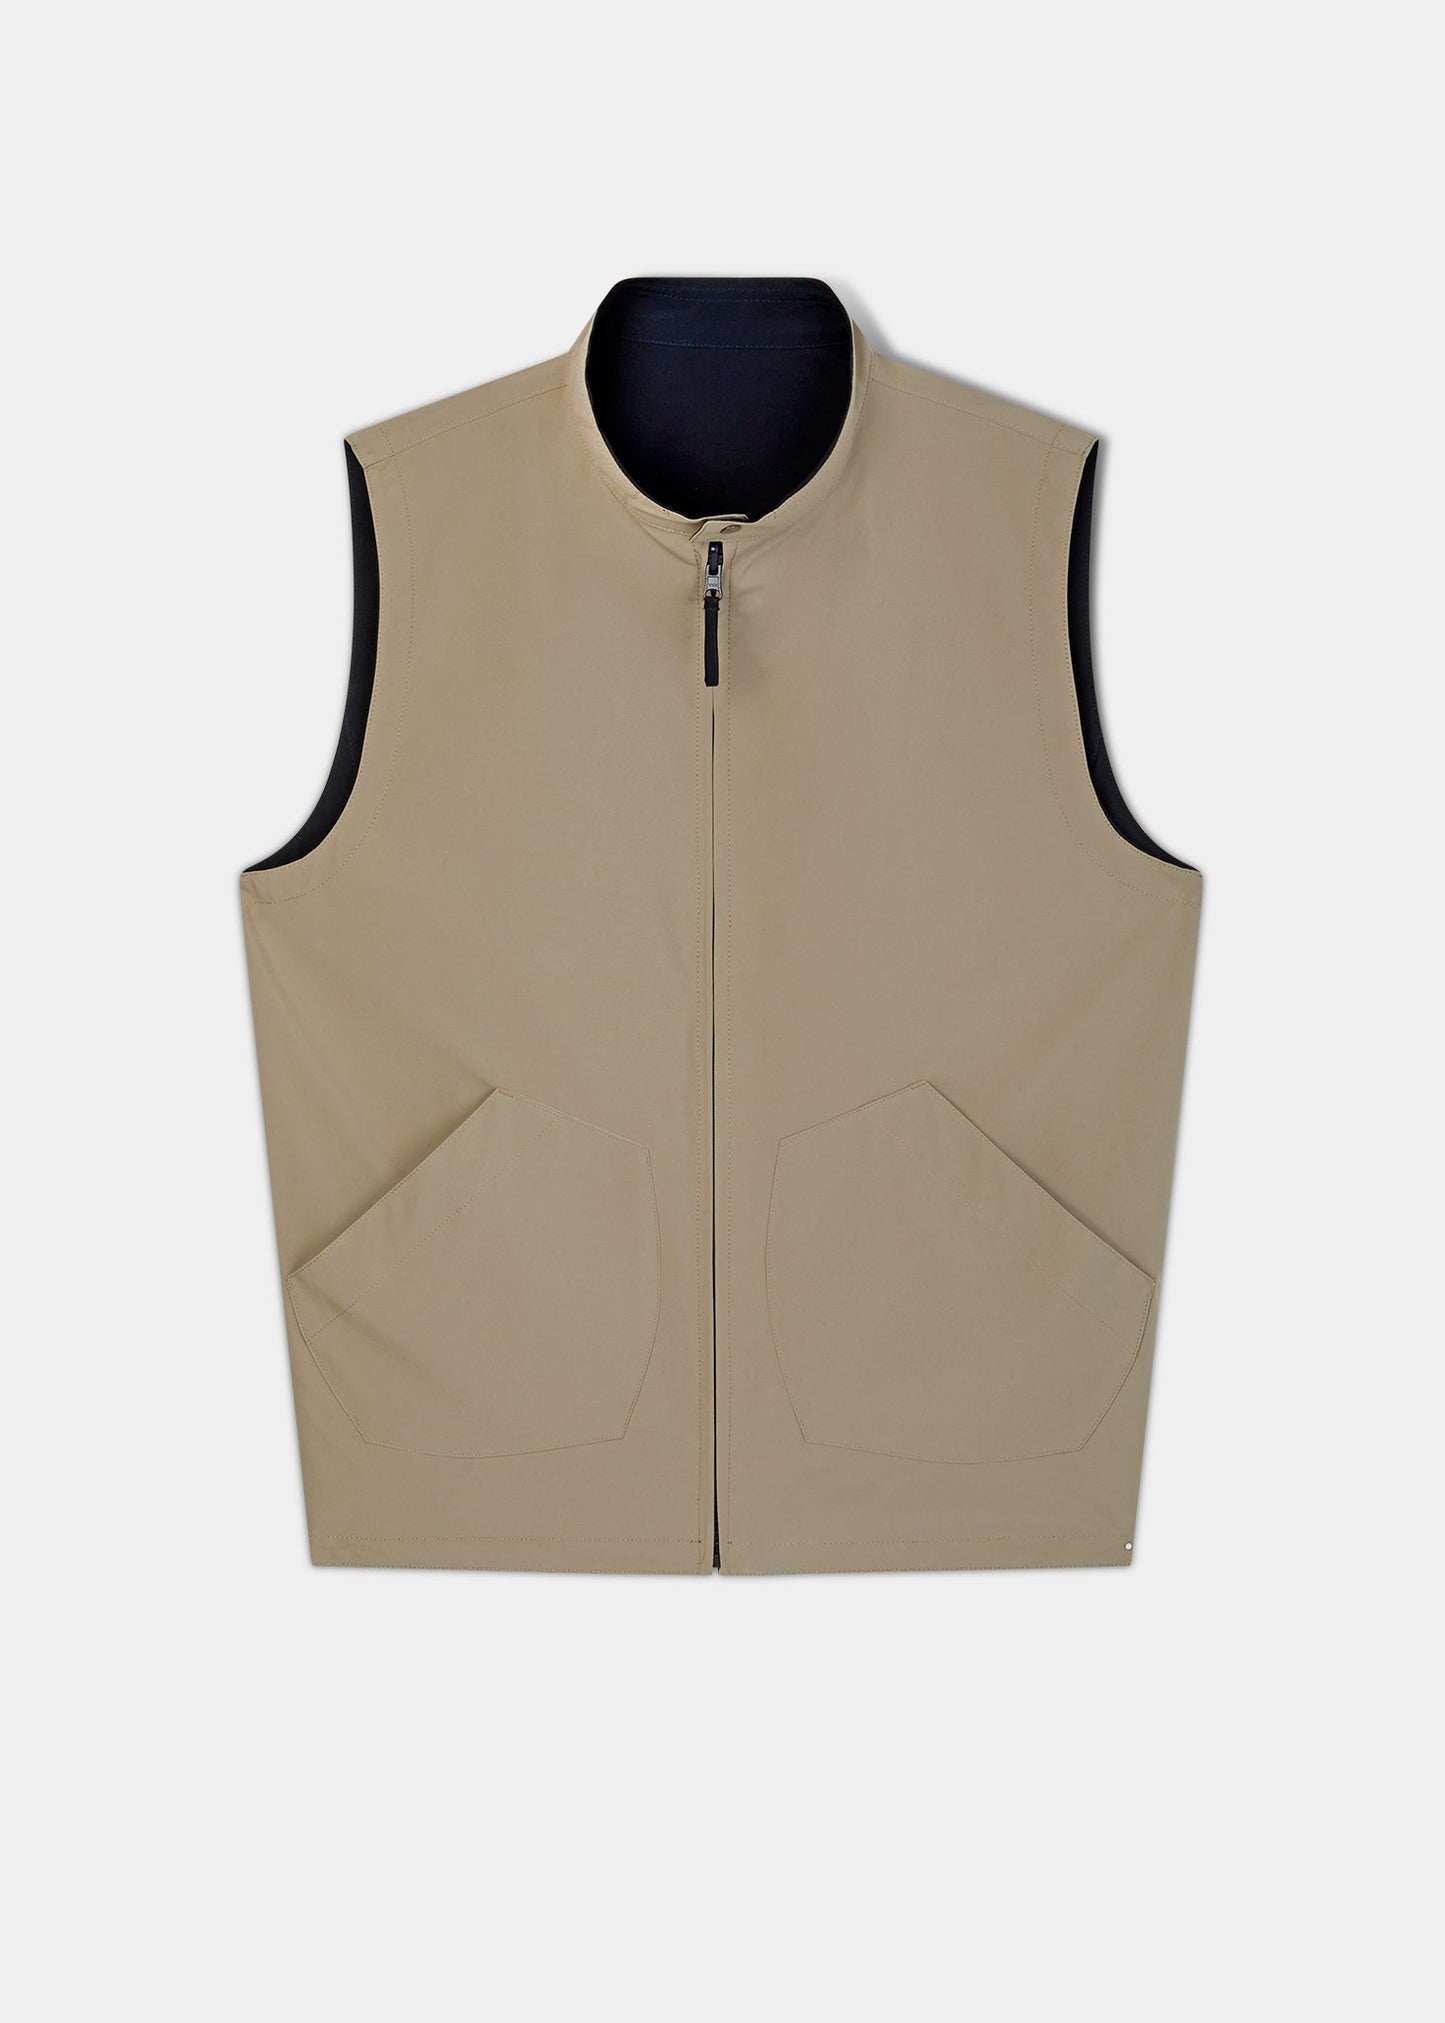 Lettoch Reversible Lightweight Summer Gilet In Navy and Beige